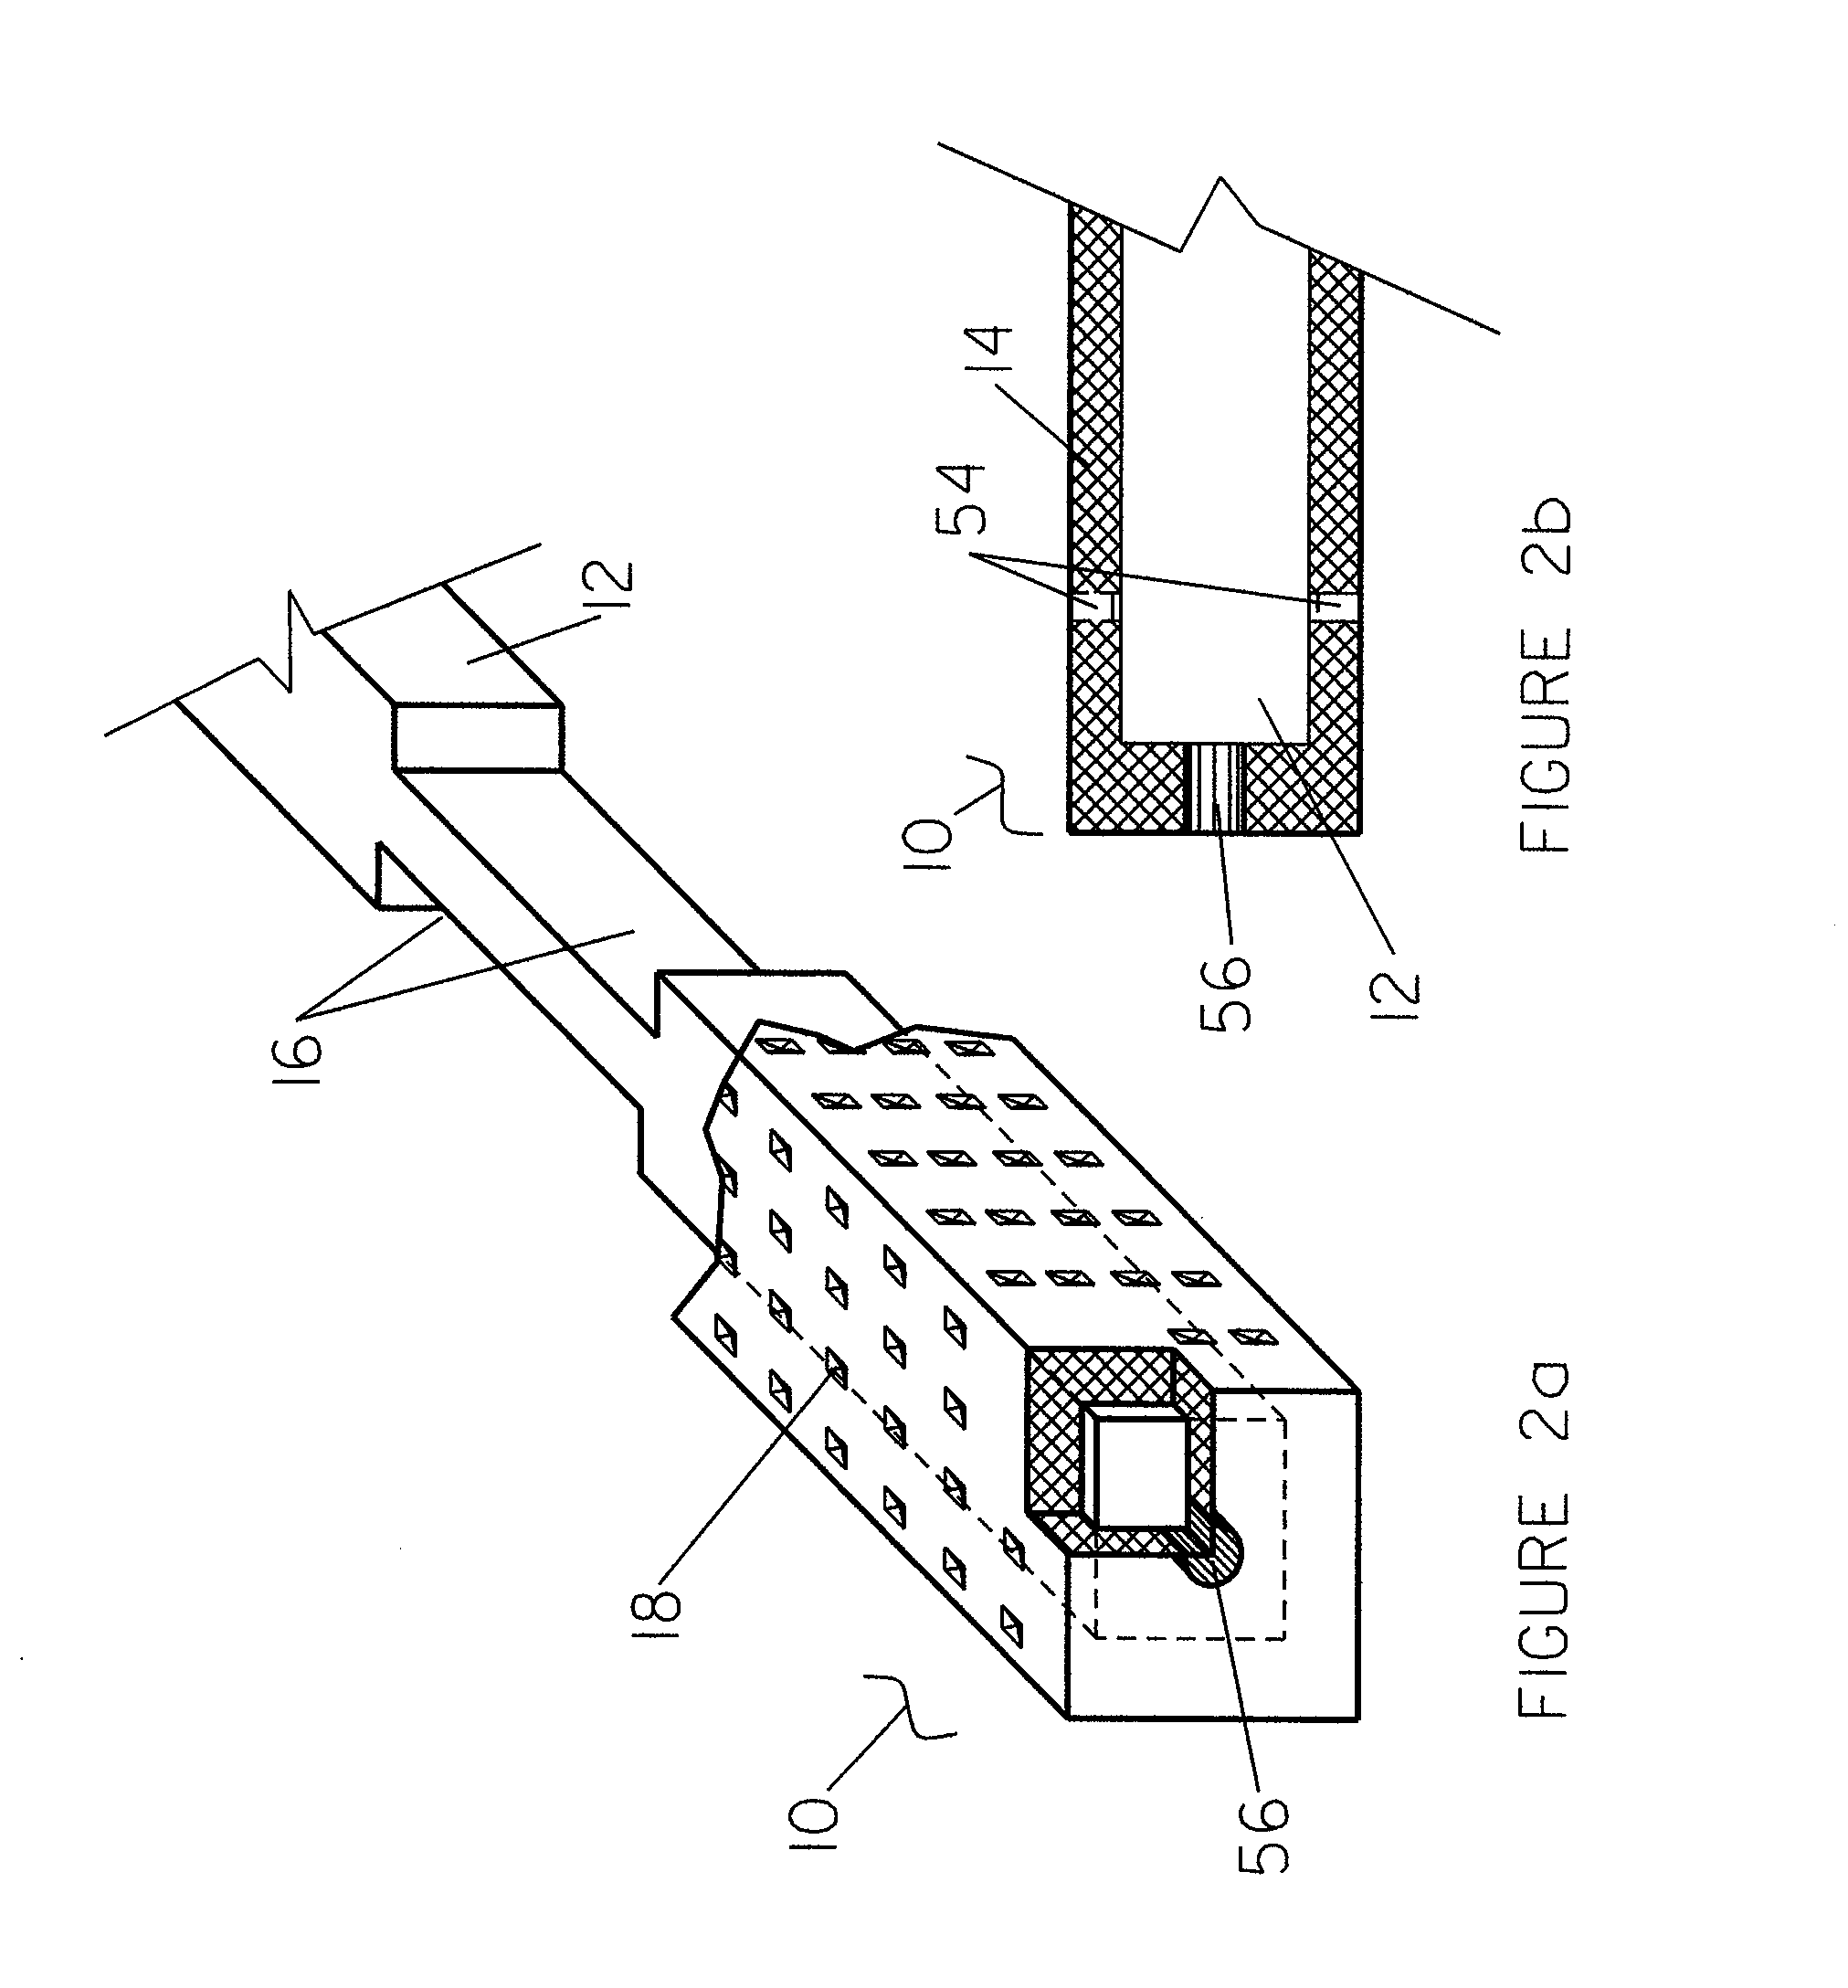 Composite load bearing structure